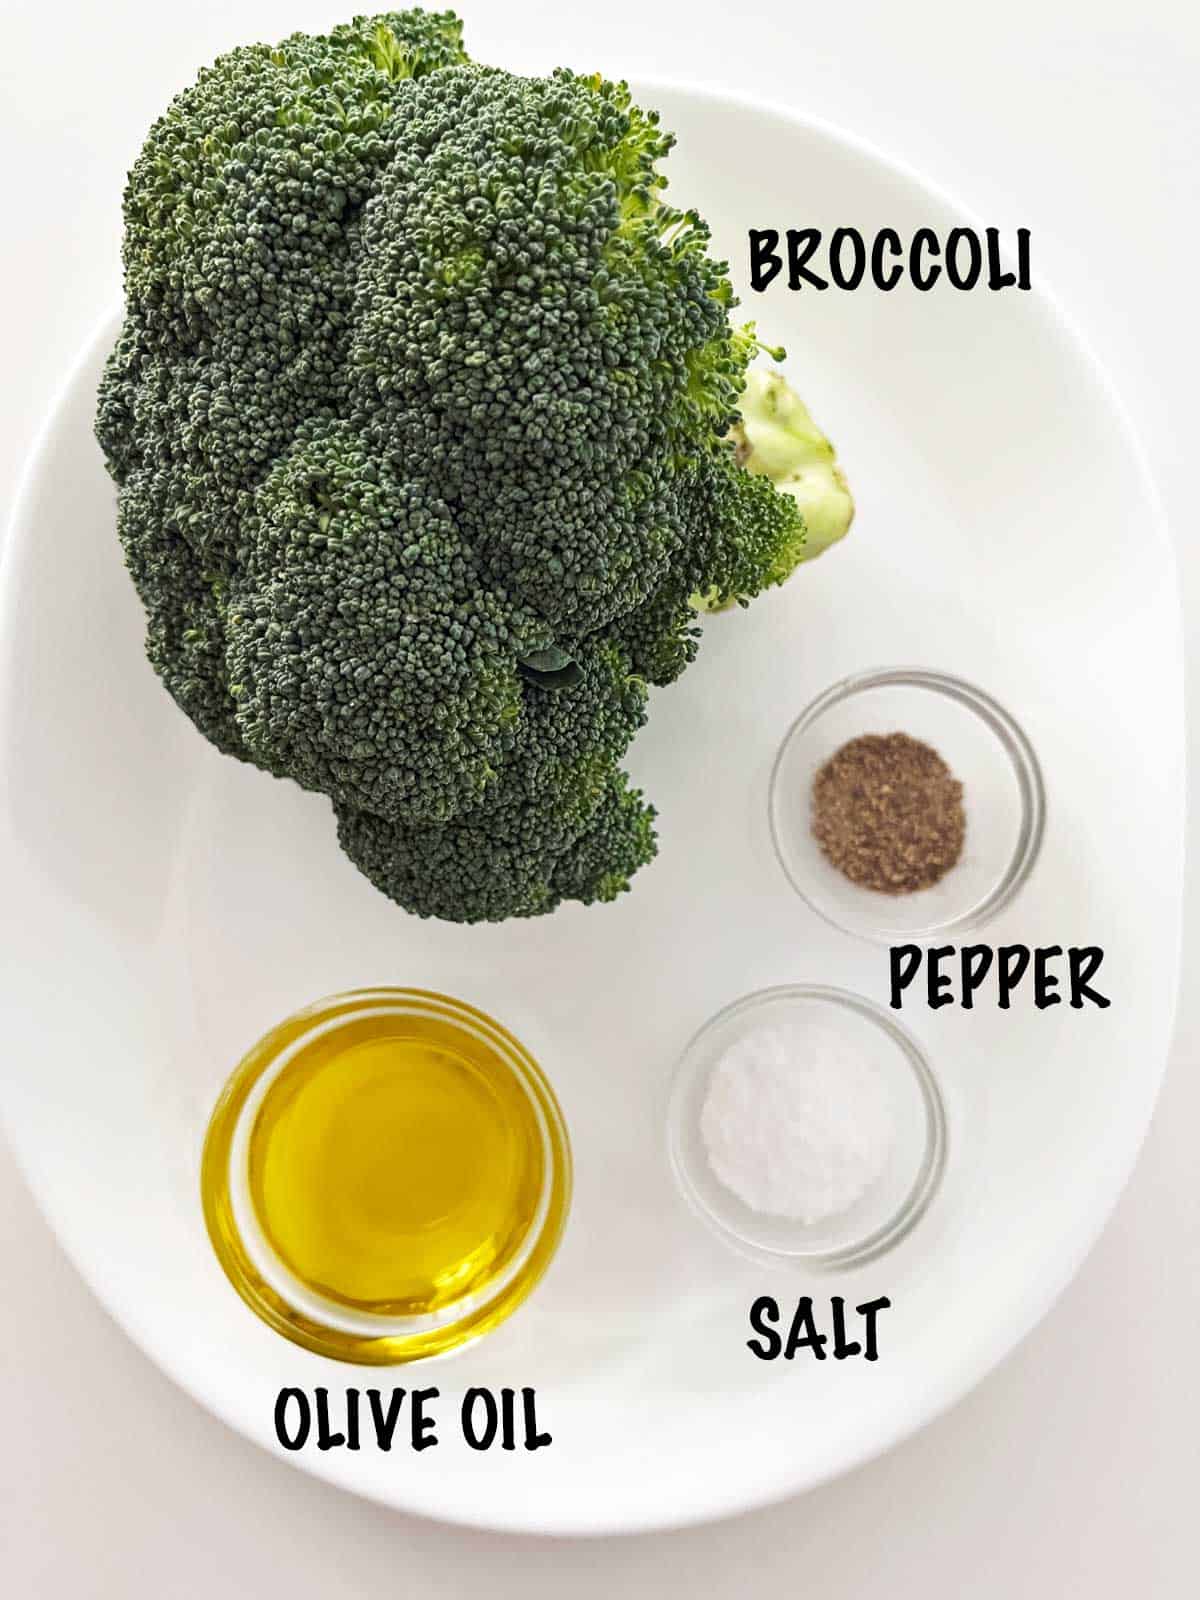 The ingredients needed for oven-roasting broccoli. 